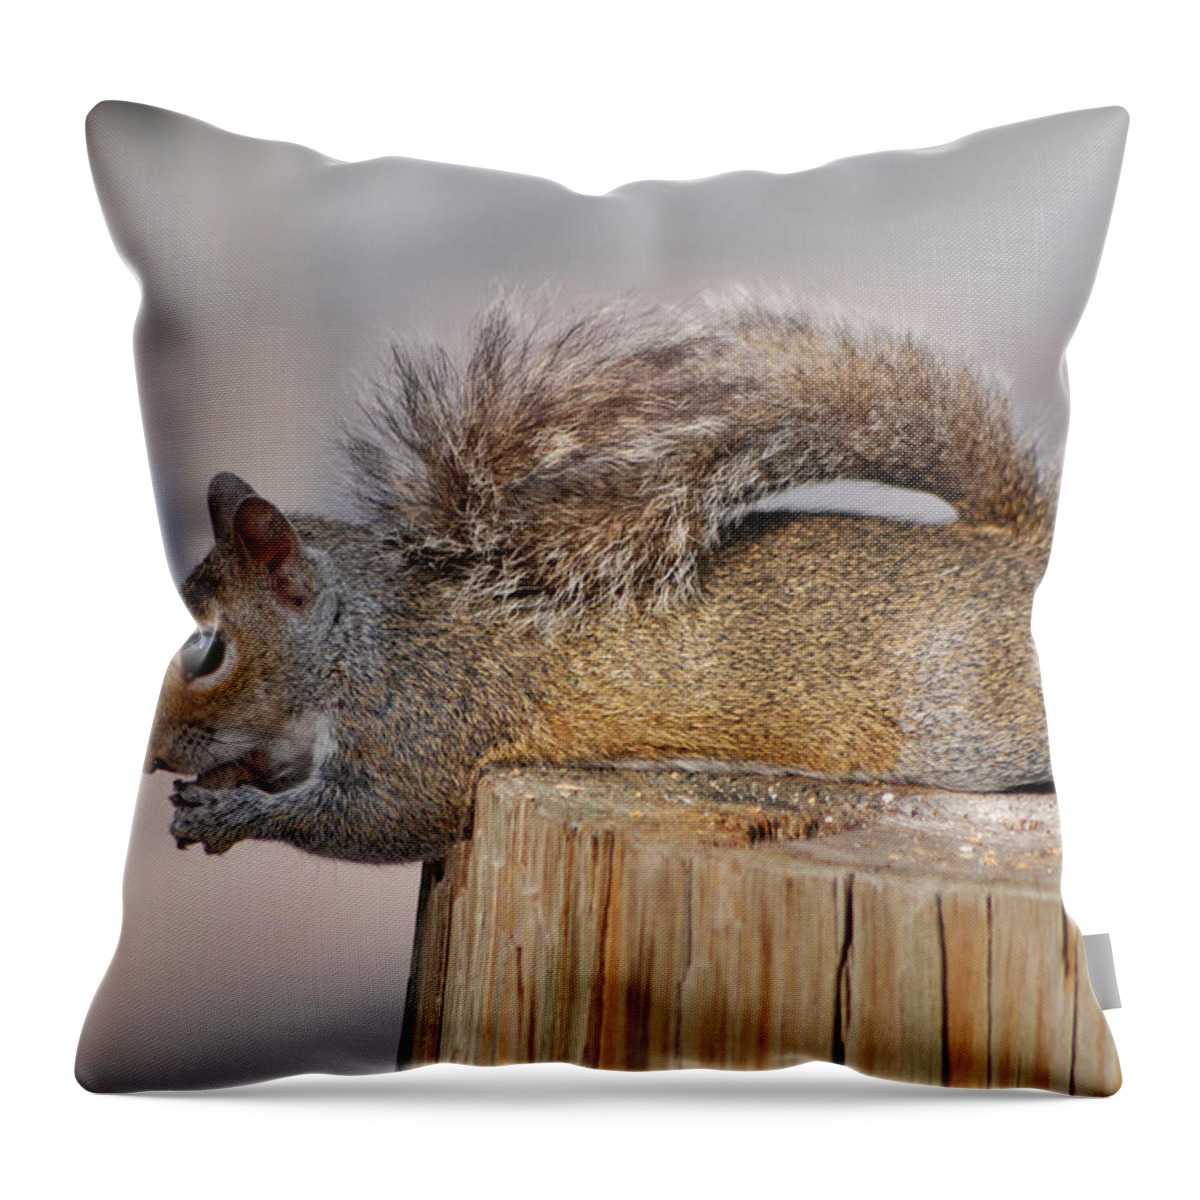 Squirrel Throw Pillow featuring the photograph 6- Squirrel by Joseph Keane